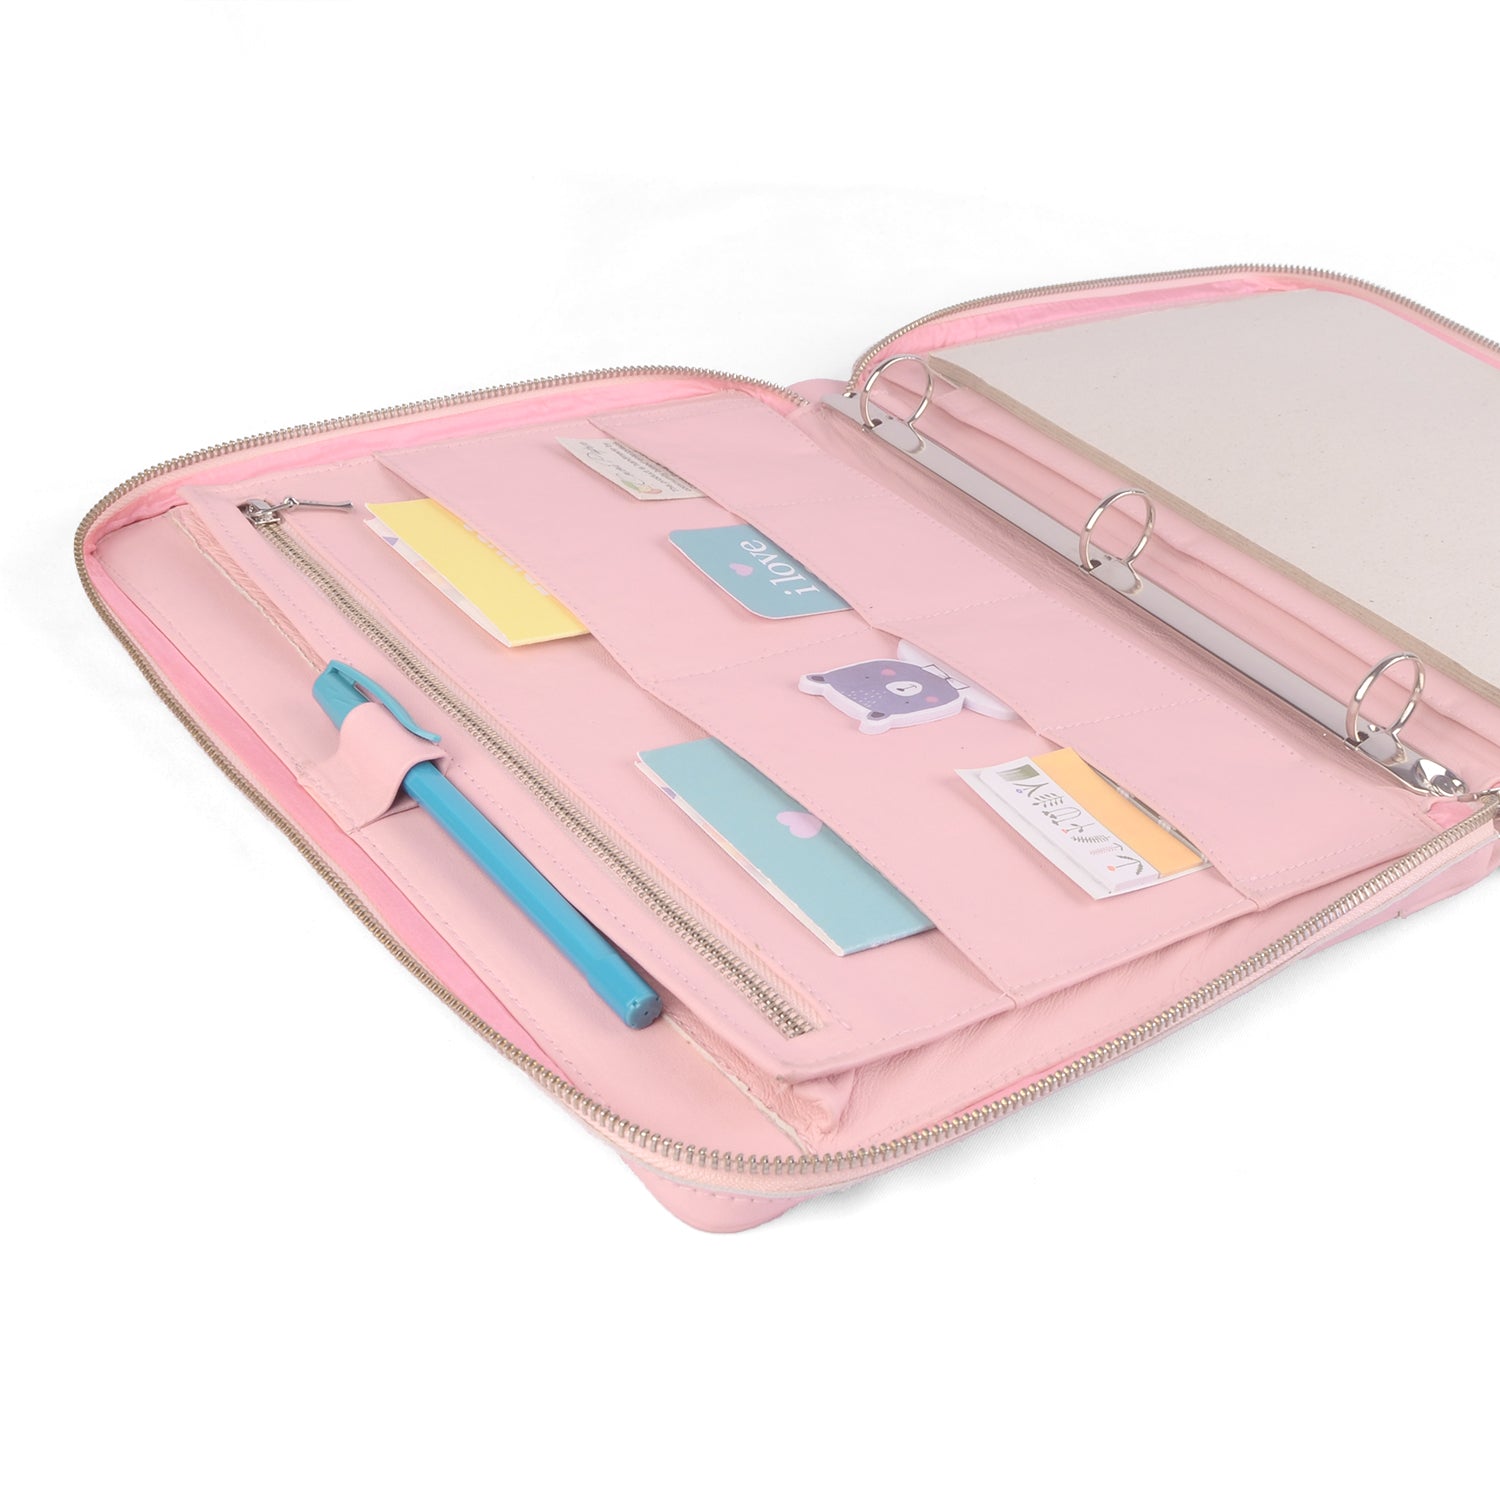 One Pencil Pouch 3 Ring Binder Zipper Pencil Case Binder Bag Pick Your  Color